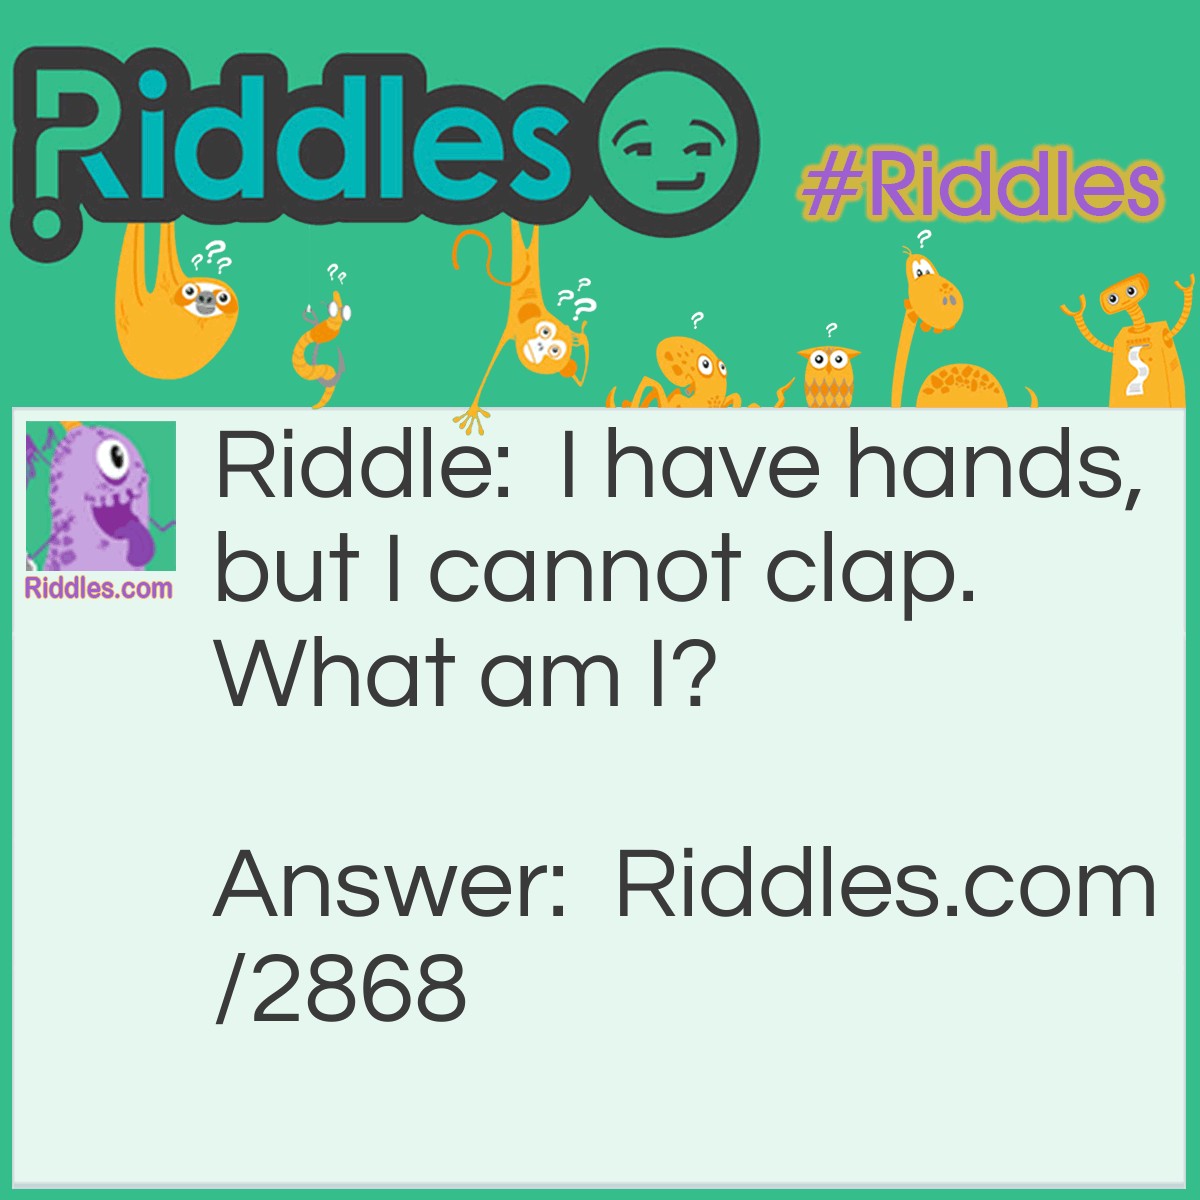 Riddle: I have hands, but I cannot clap. What am I? Answer: A clock!